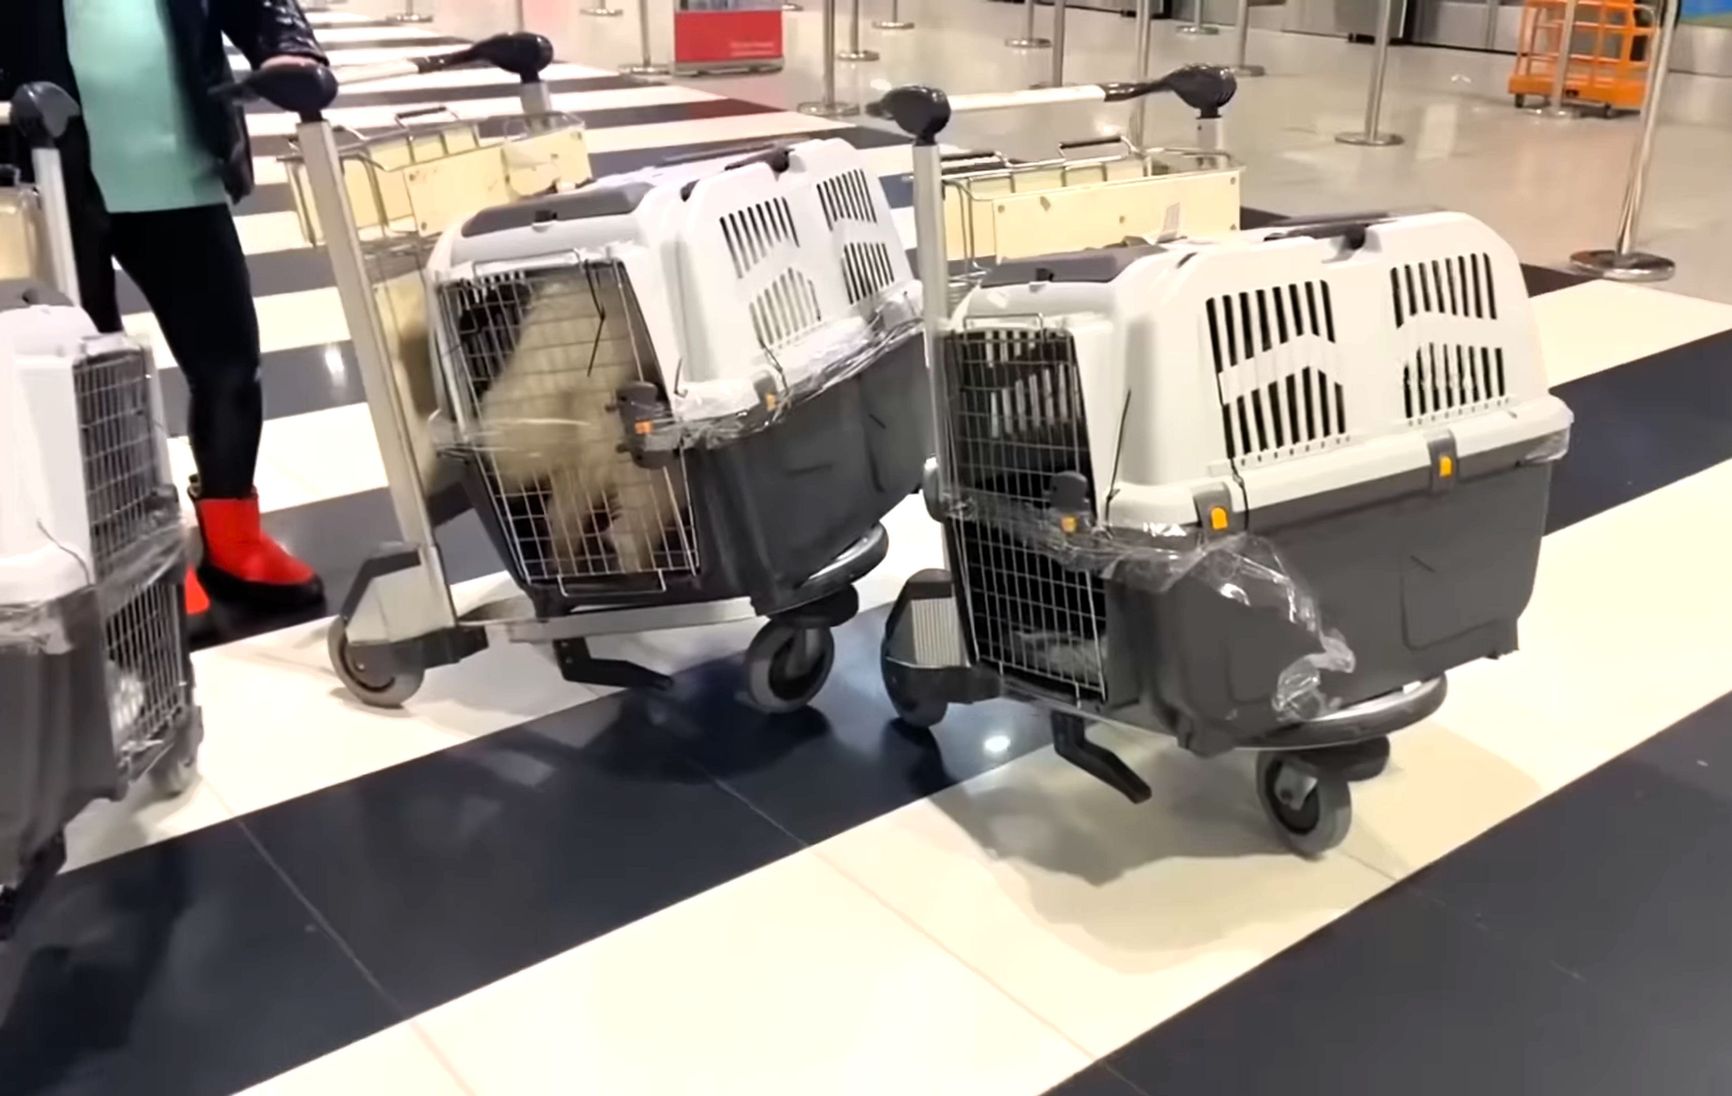 Crates with large dogs at Vnukovo Airport in Moscow